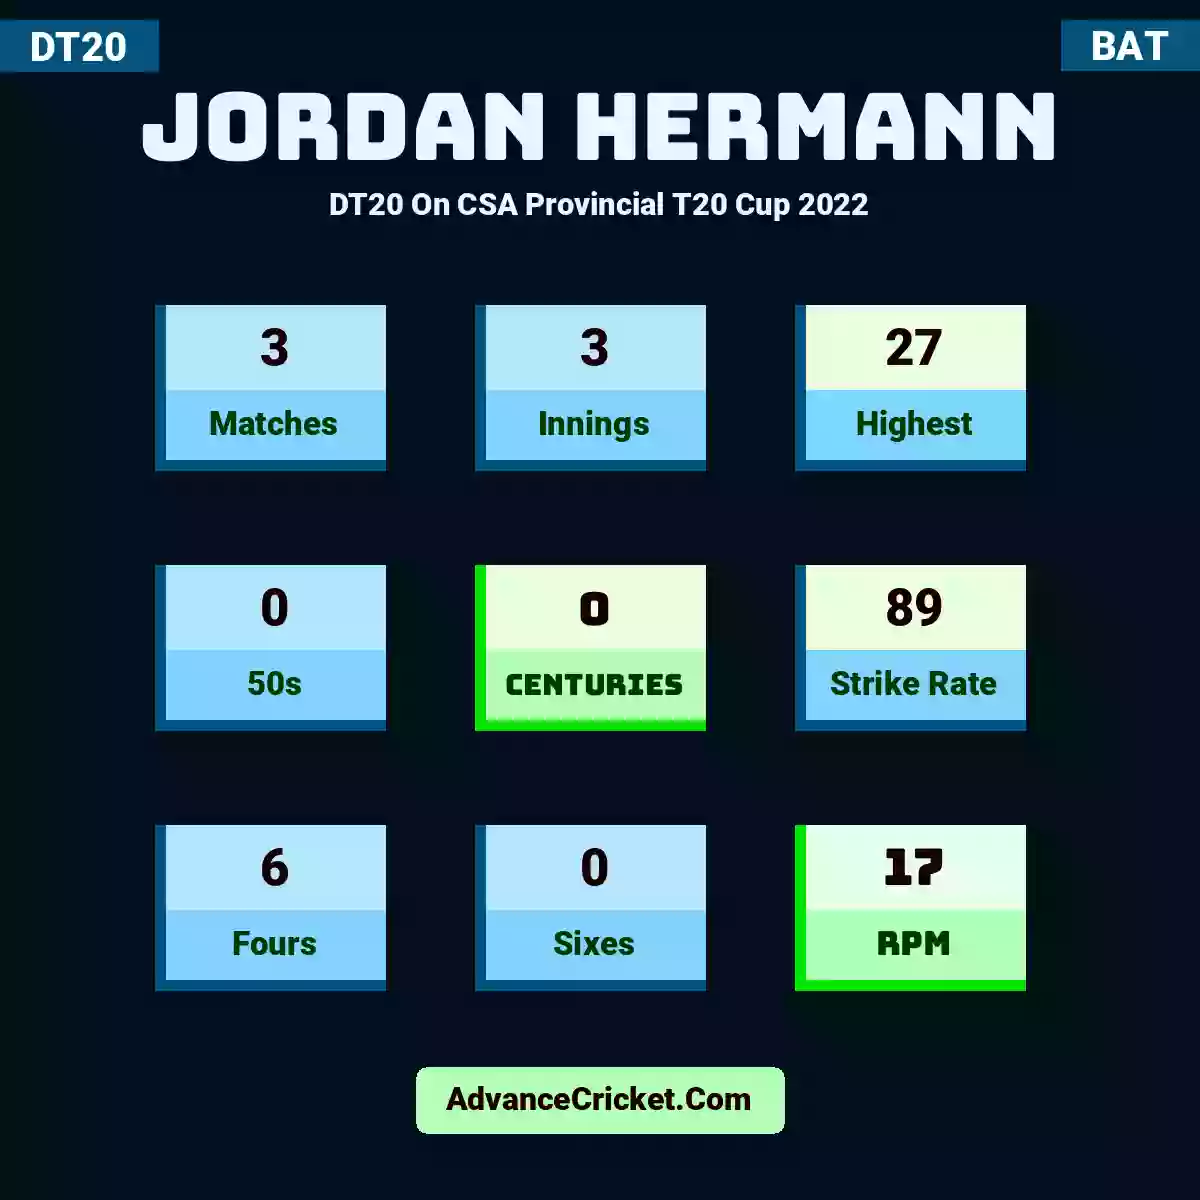 Jordan Hermann DT20  On CSA Provincial T20 Cup 2022, Jordan Hermann played 3 matches, scored 27 runs as highest, 0 half-centuries, and 0 centuries, with a strike rate of 89. j.hermann hit 6 fours and 0 sixes, with an RPM of 17.